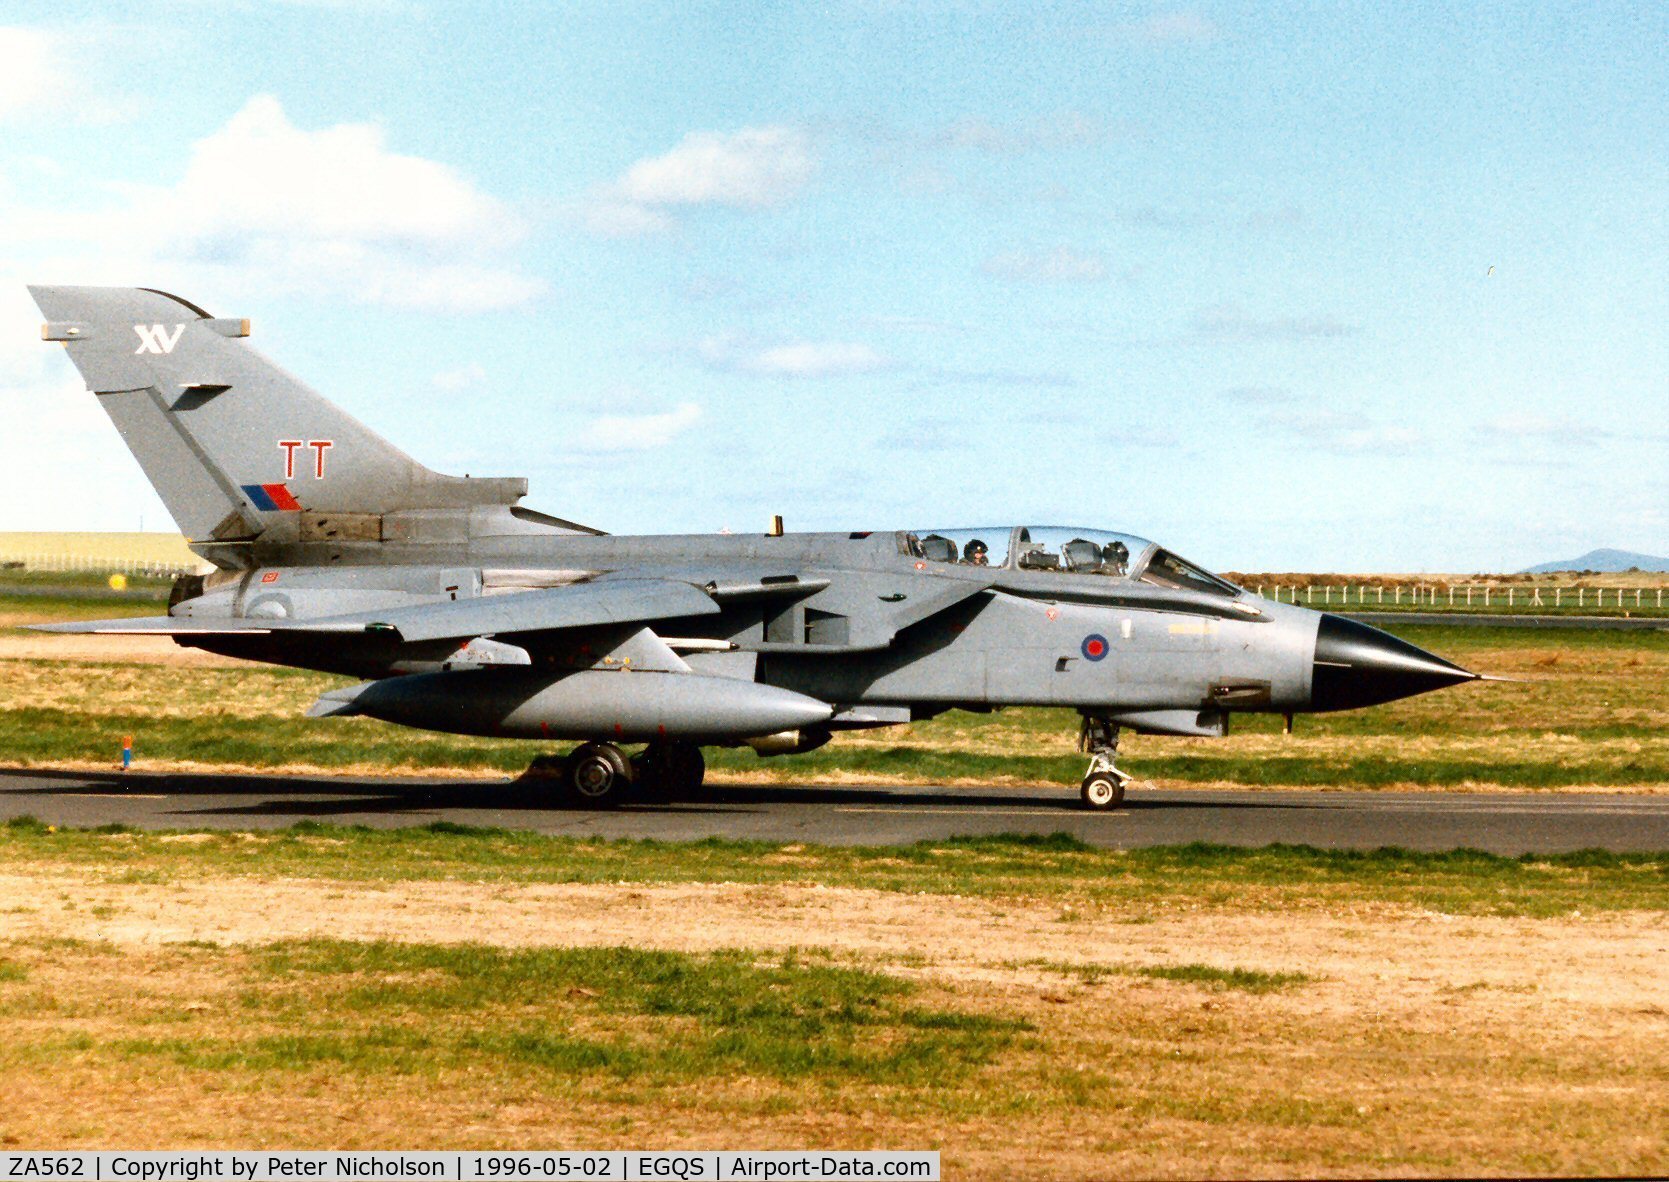 ZA562, 1981 Panavia Tornado GR.1 C/N 085/BT021/3046, Tornado GR.1 of 15[R] Squadron taxying to Runway 05 at Lossiemouth in May 1996.